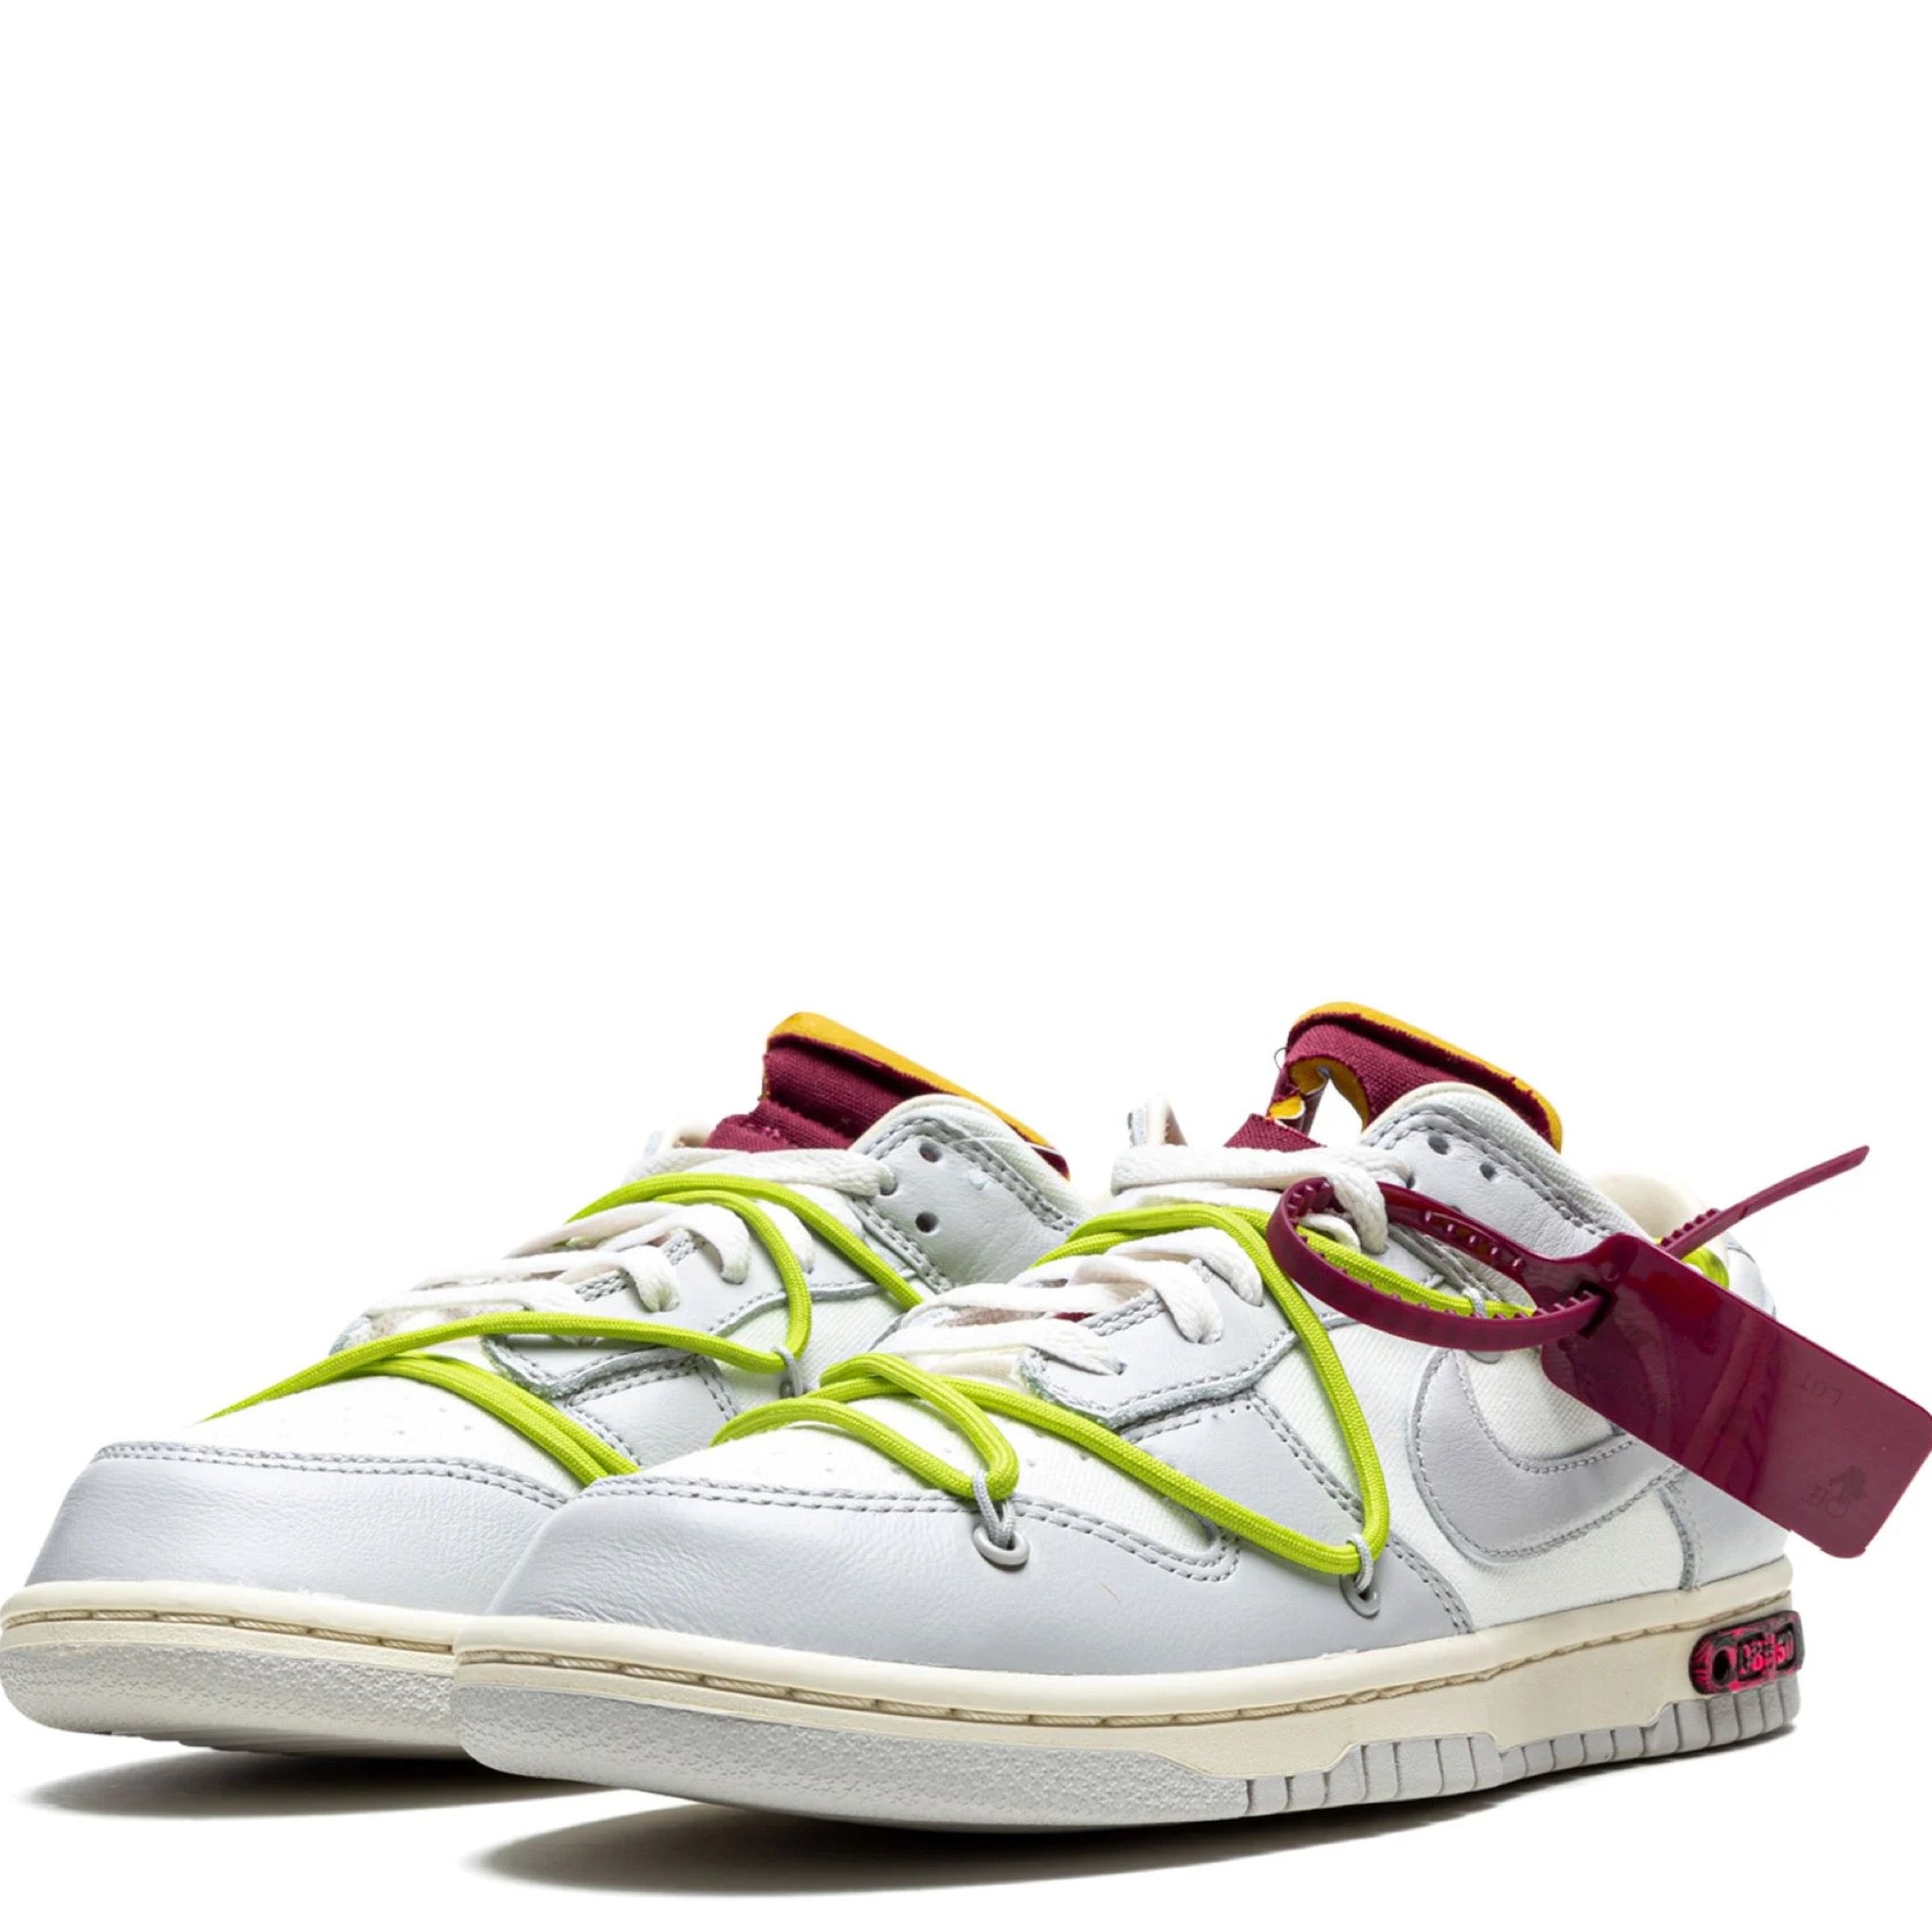 NIKE X OFF-WHITE DUNK LOW LOT 8